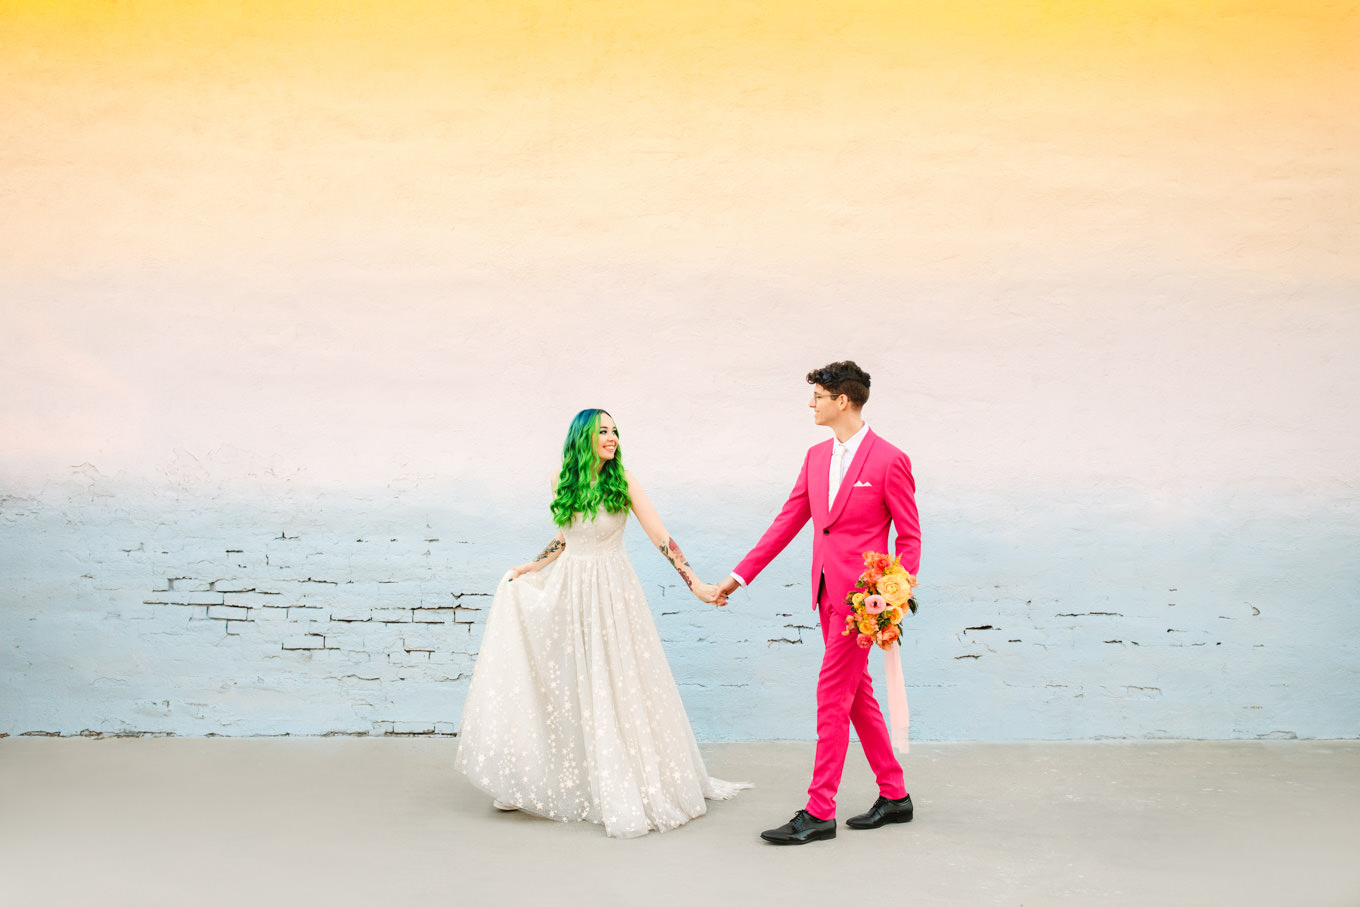 Groom in hot pink suit with bride in star gown with green hair | Colorful wedding at The Unique Space Los Angeles published in The Knot Magazine | Fresh and colorful photography for fun-loving couples in Southern California | #colorfulwedding #losangeleswedding #weddingphotography #uniquespace Source: Mary Costa Photography | Los Angeles